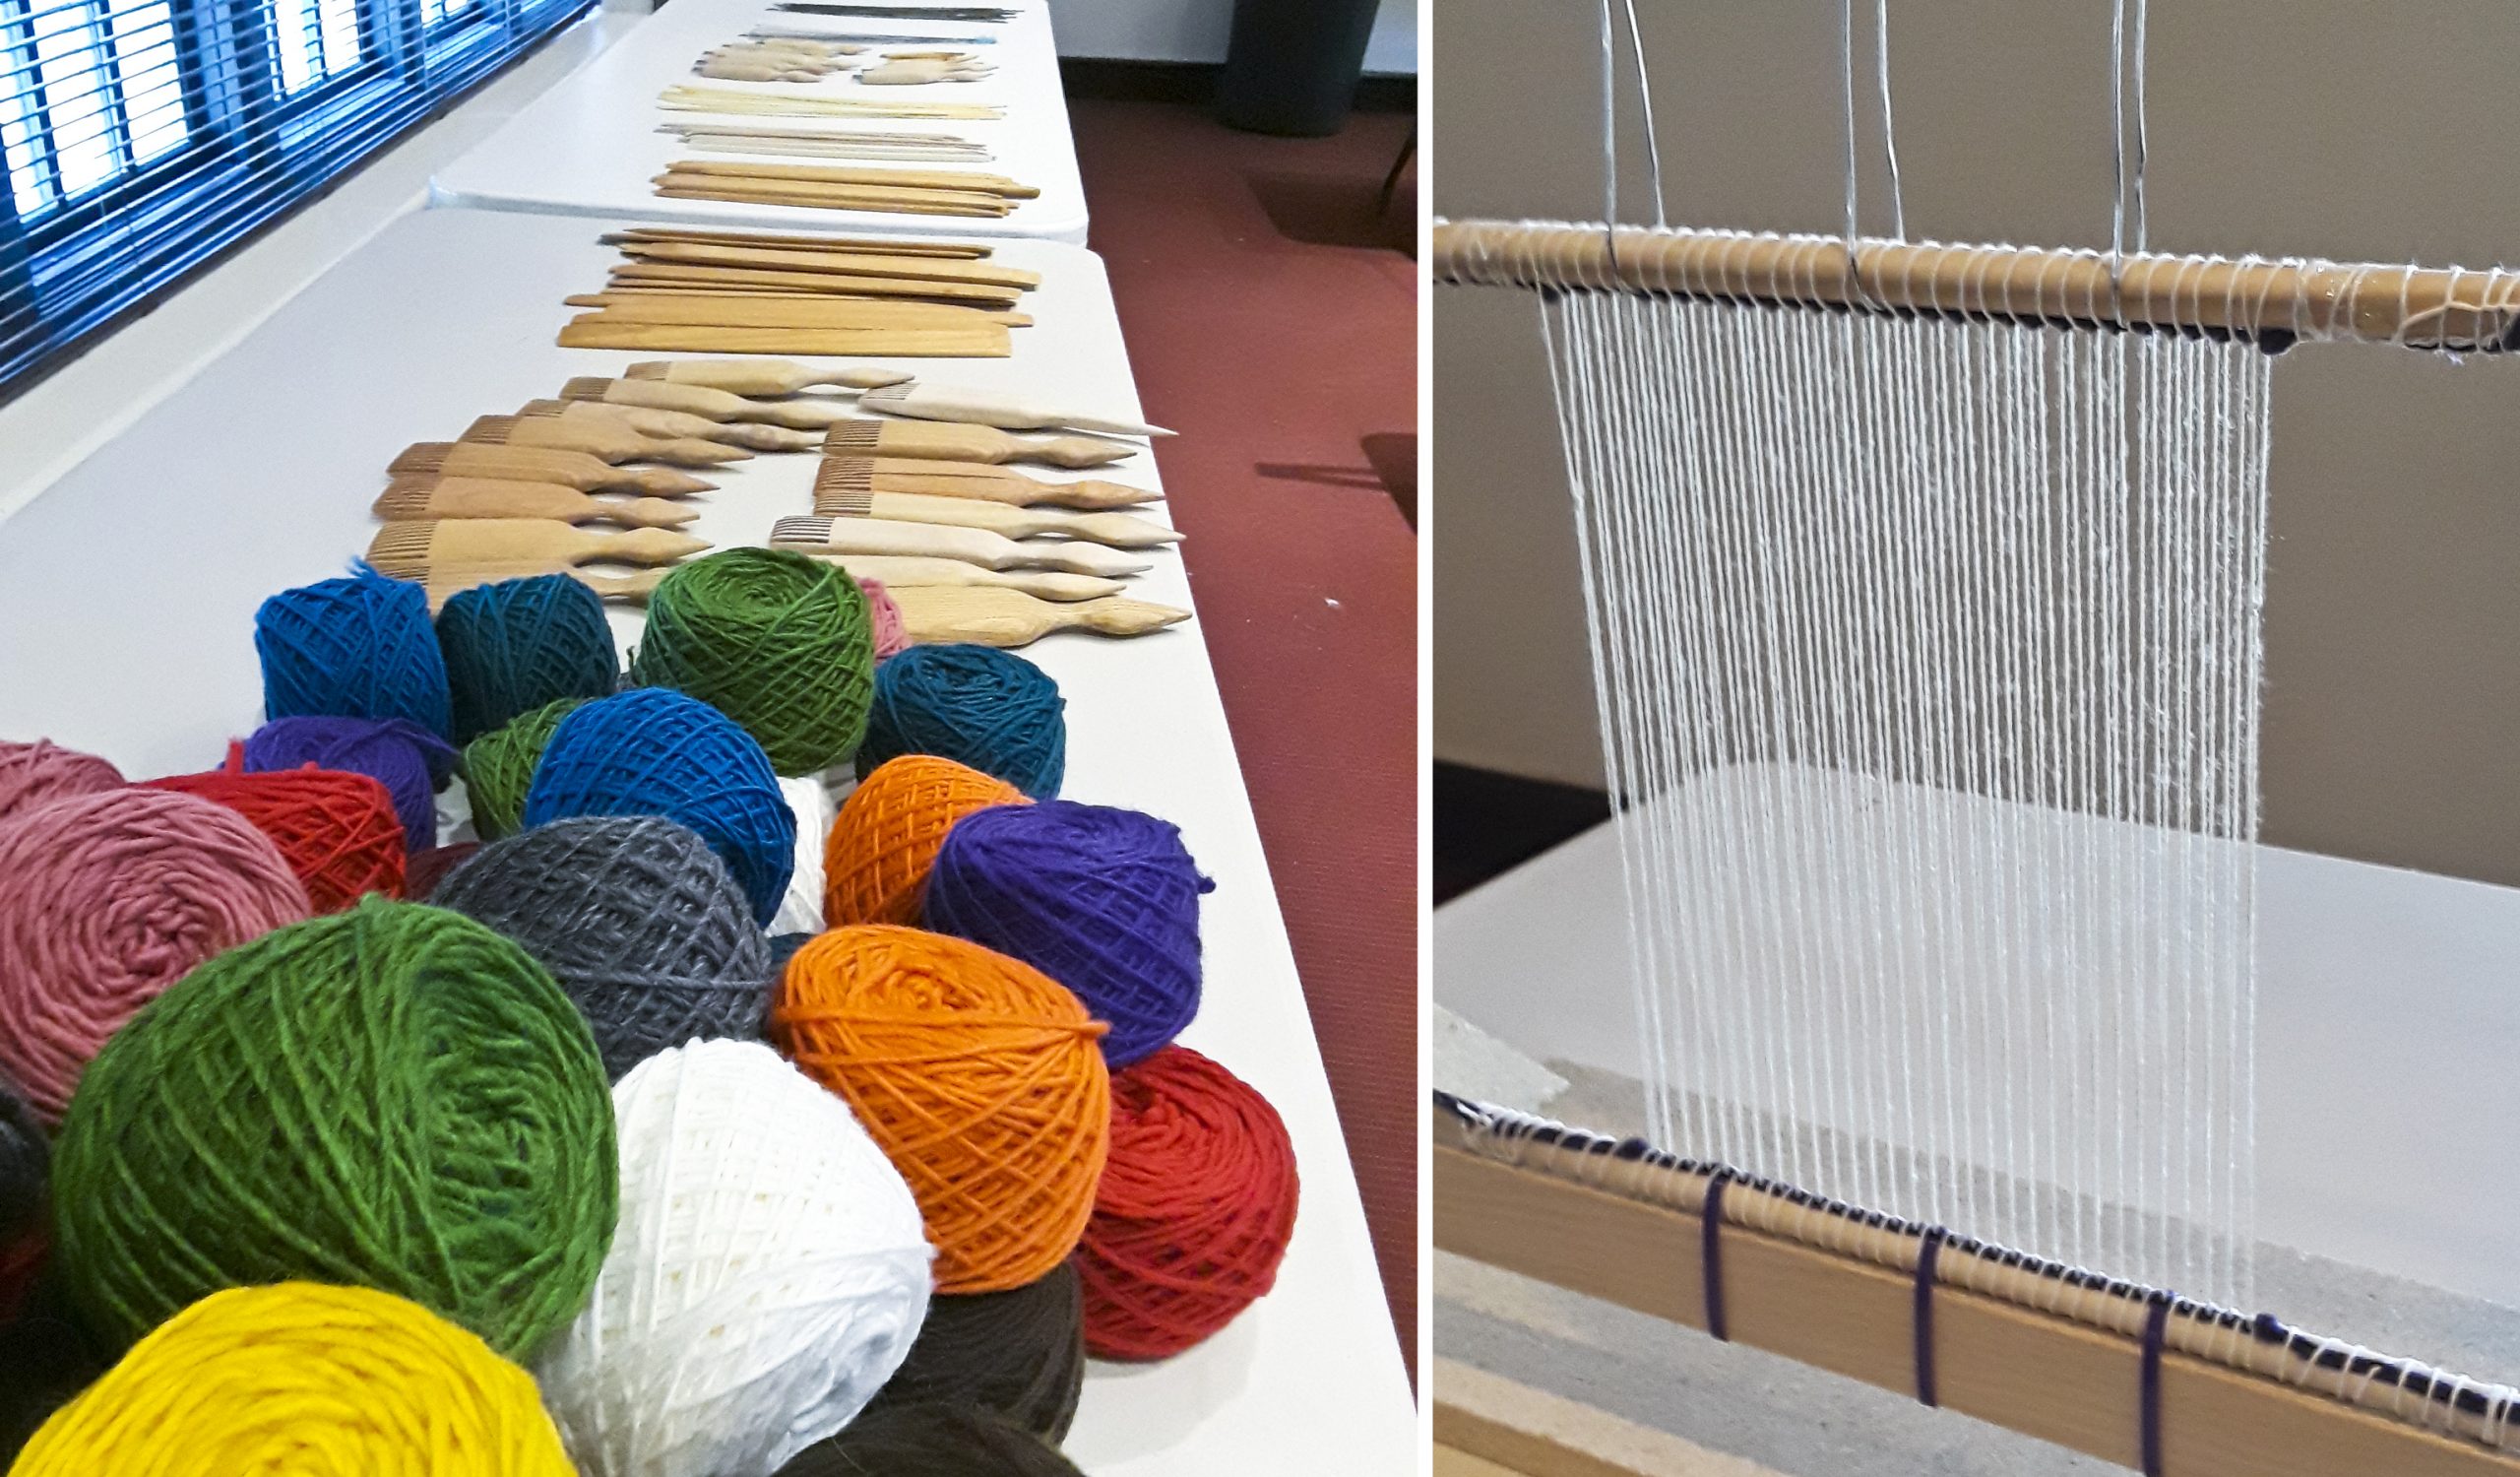 A table with the supplies and an empty loom for the weaving project